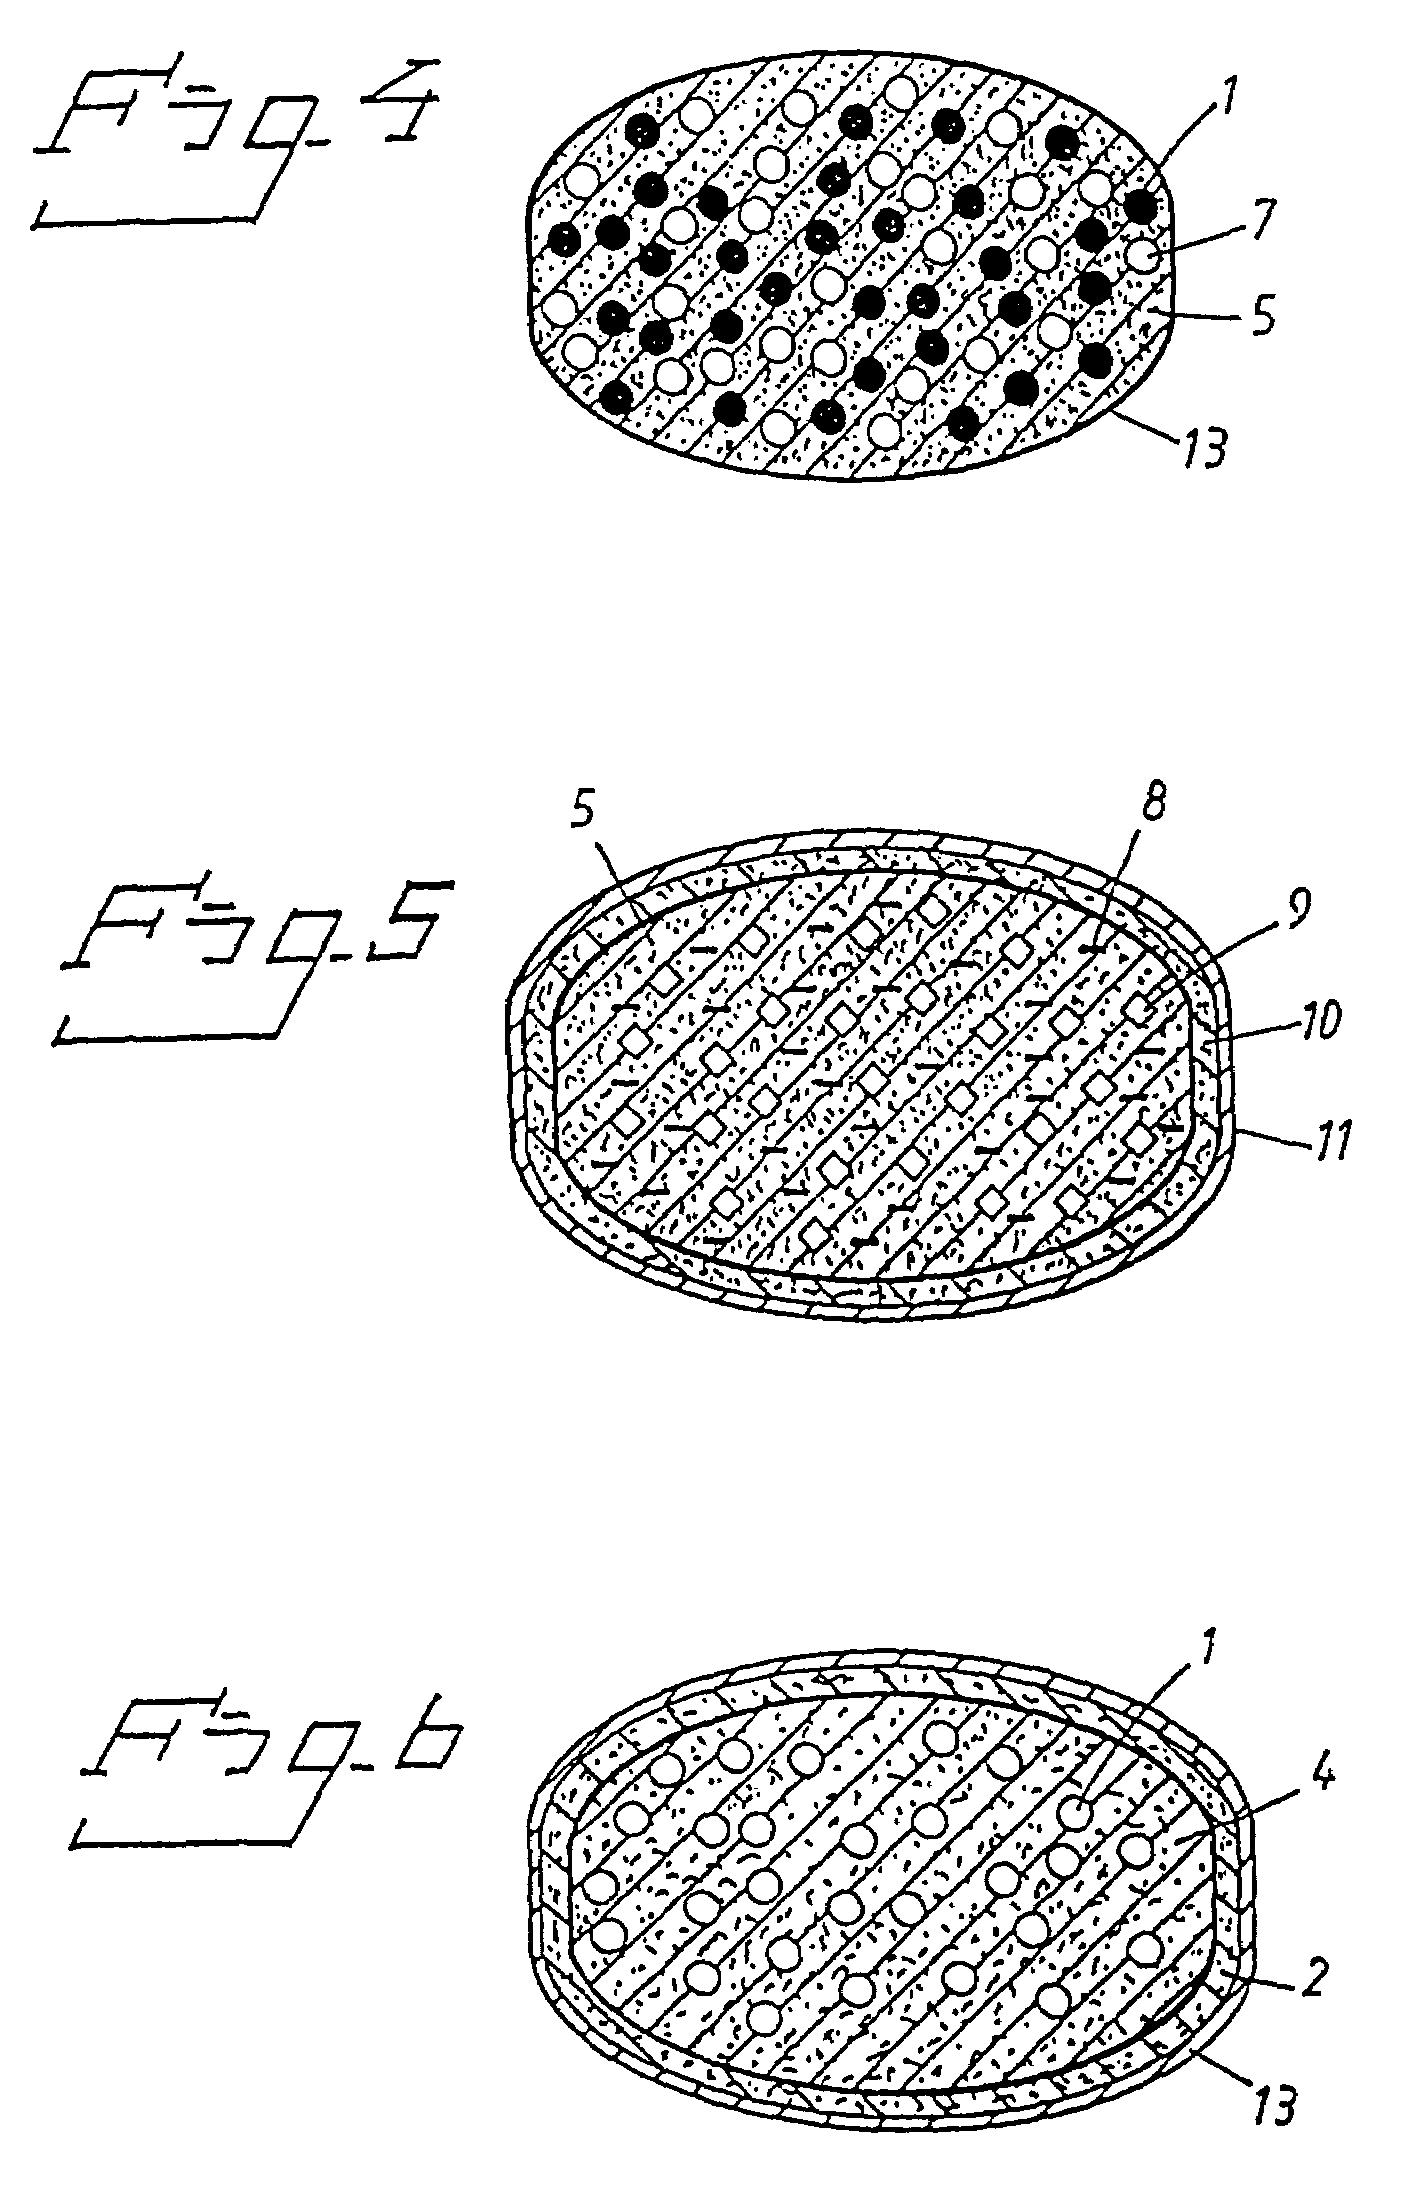 Oral pharmaceutical dosage forms comprising a proton pump inhibitor and a NSAID